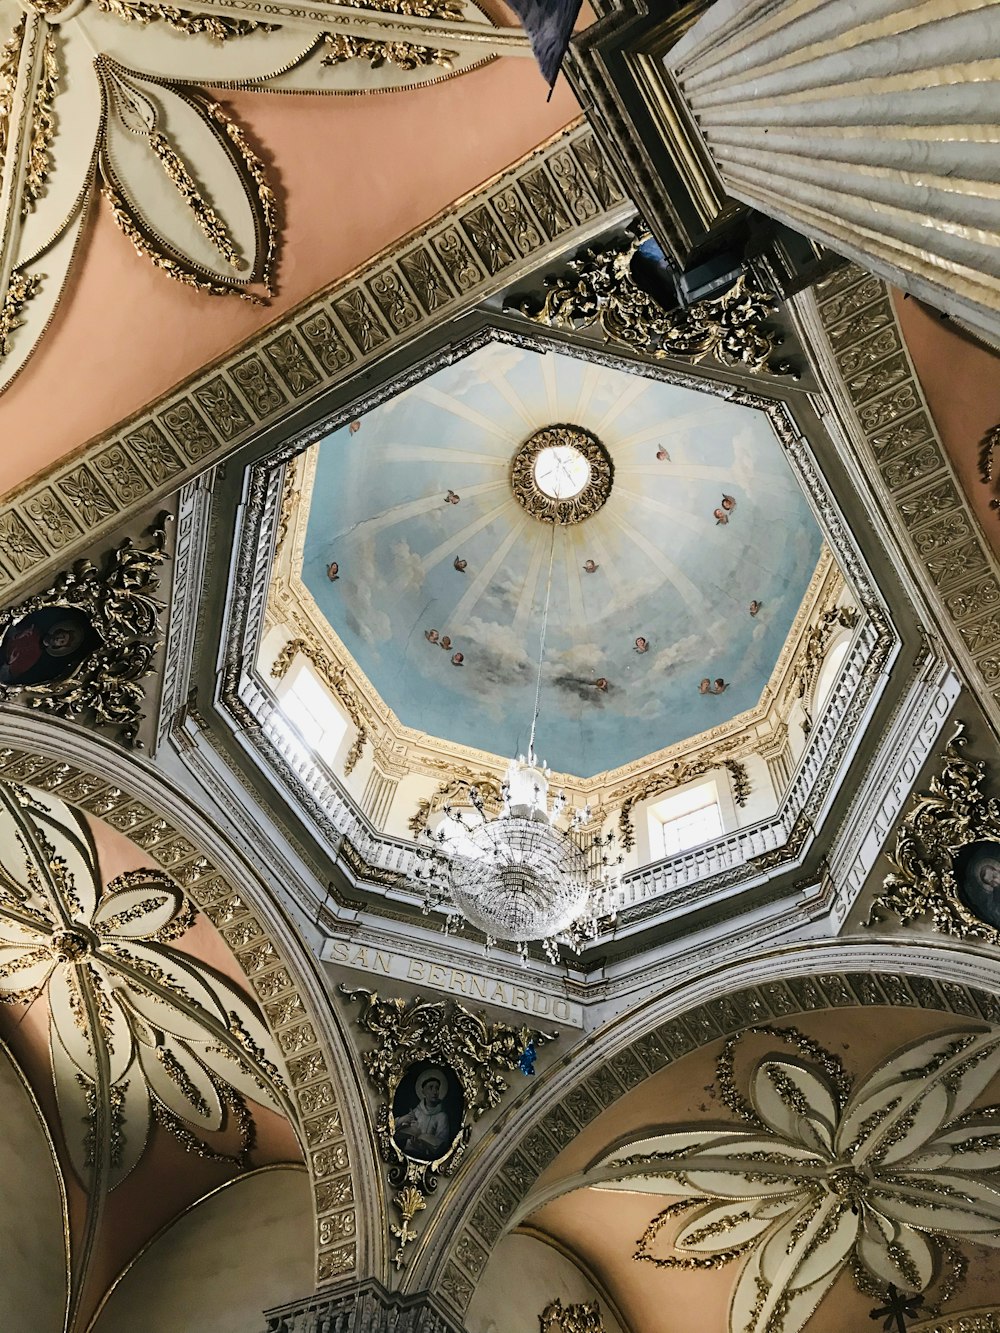 cathedral dome ceiling